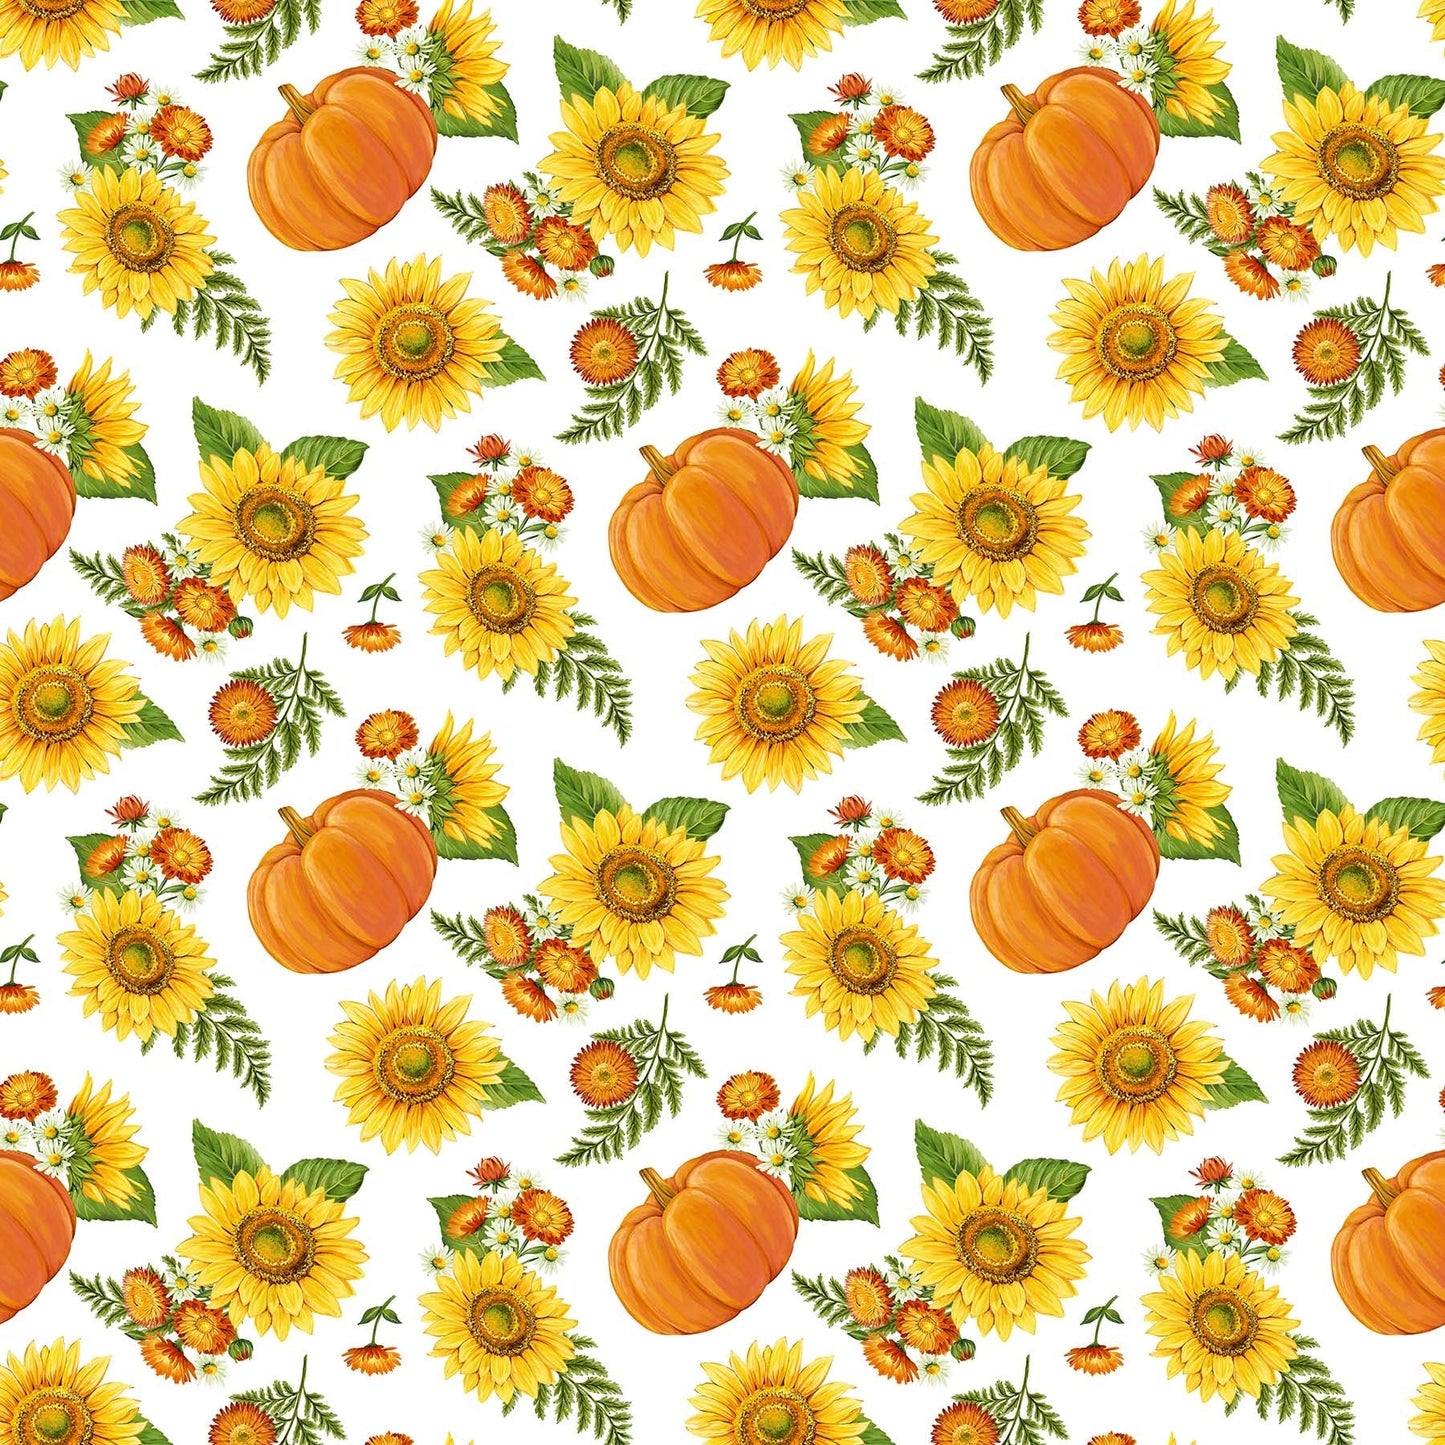 Angels Neverland fabric bundle Sunshine Harvest 1 yard Fall Fabric Bundle Cut & Curated by Angels Neverland